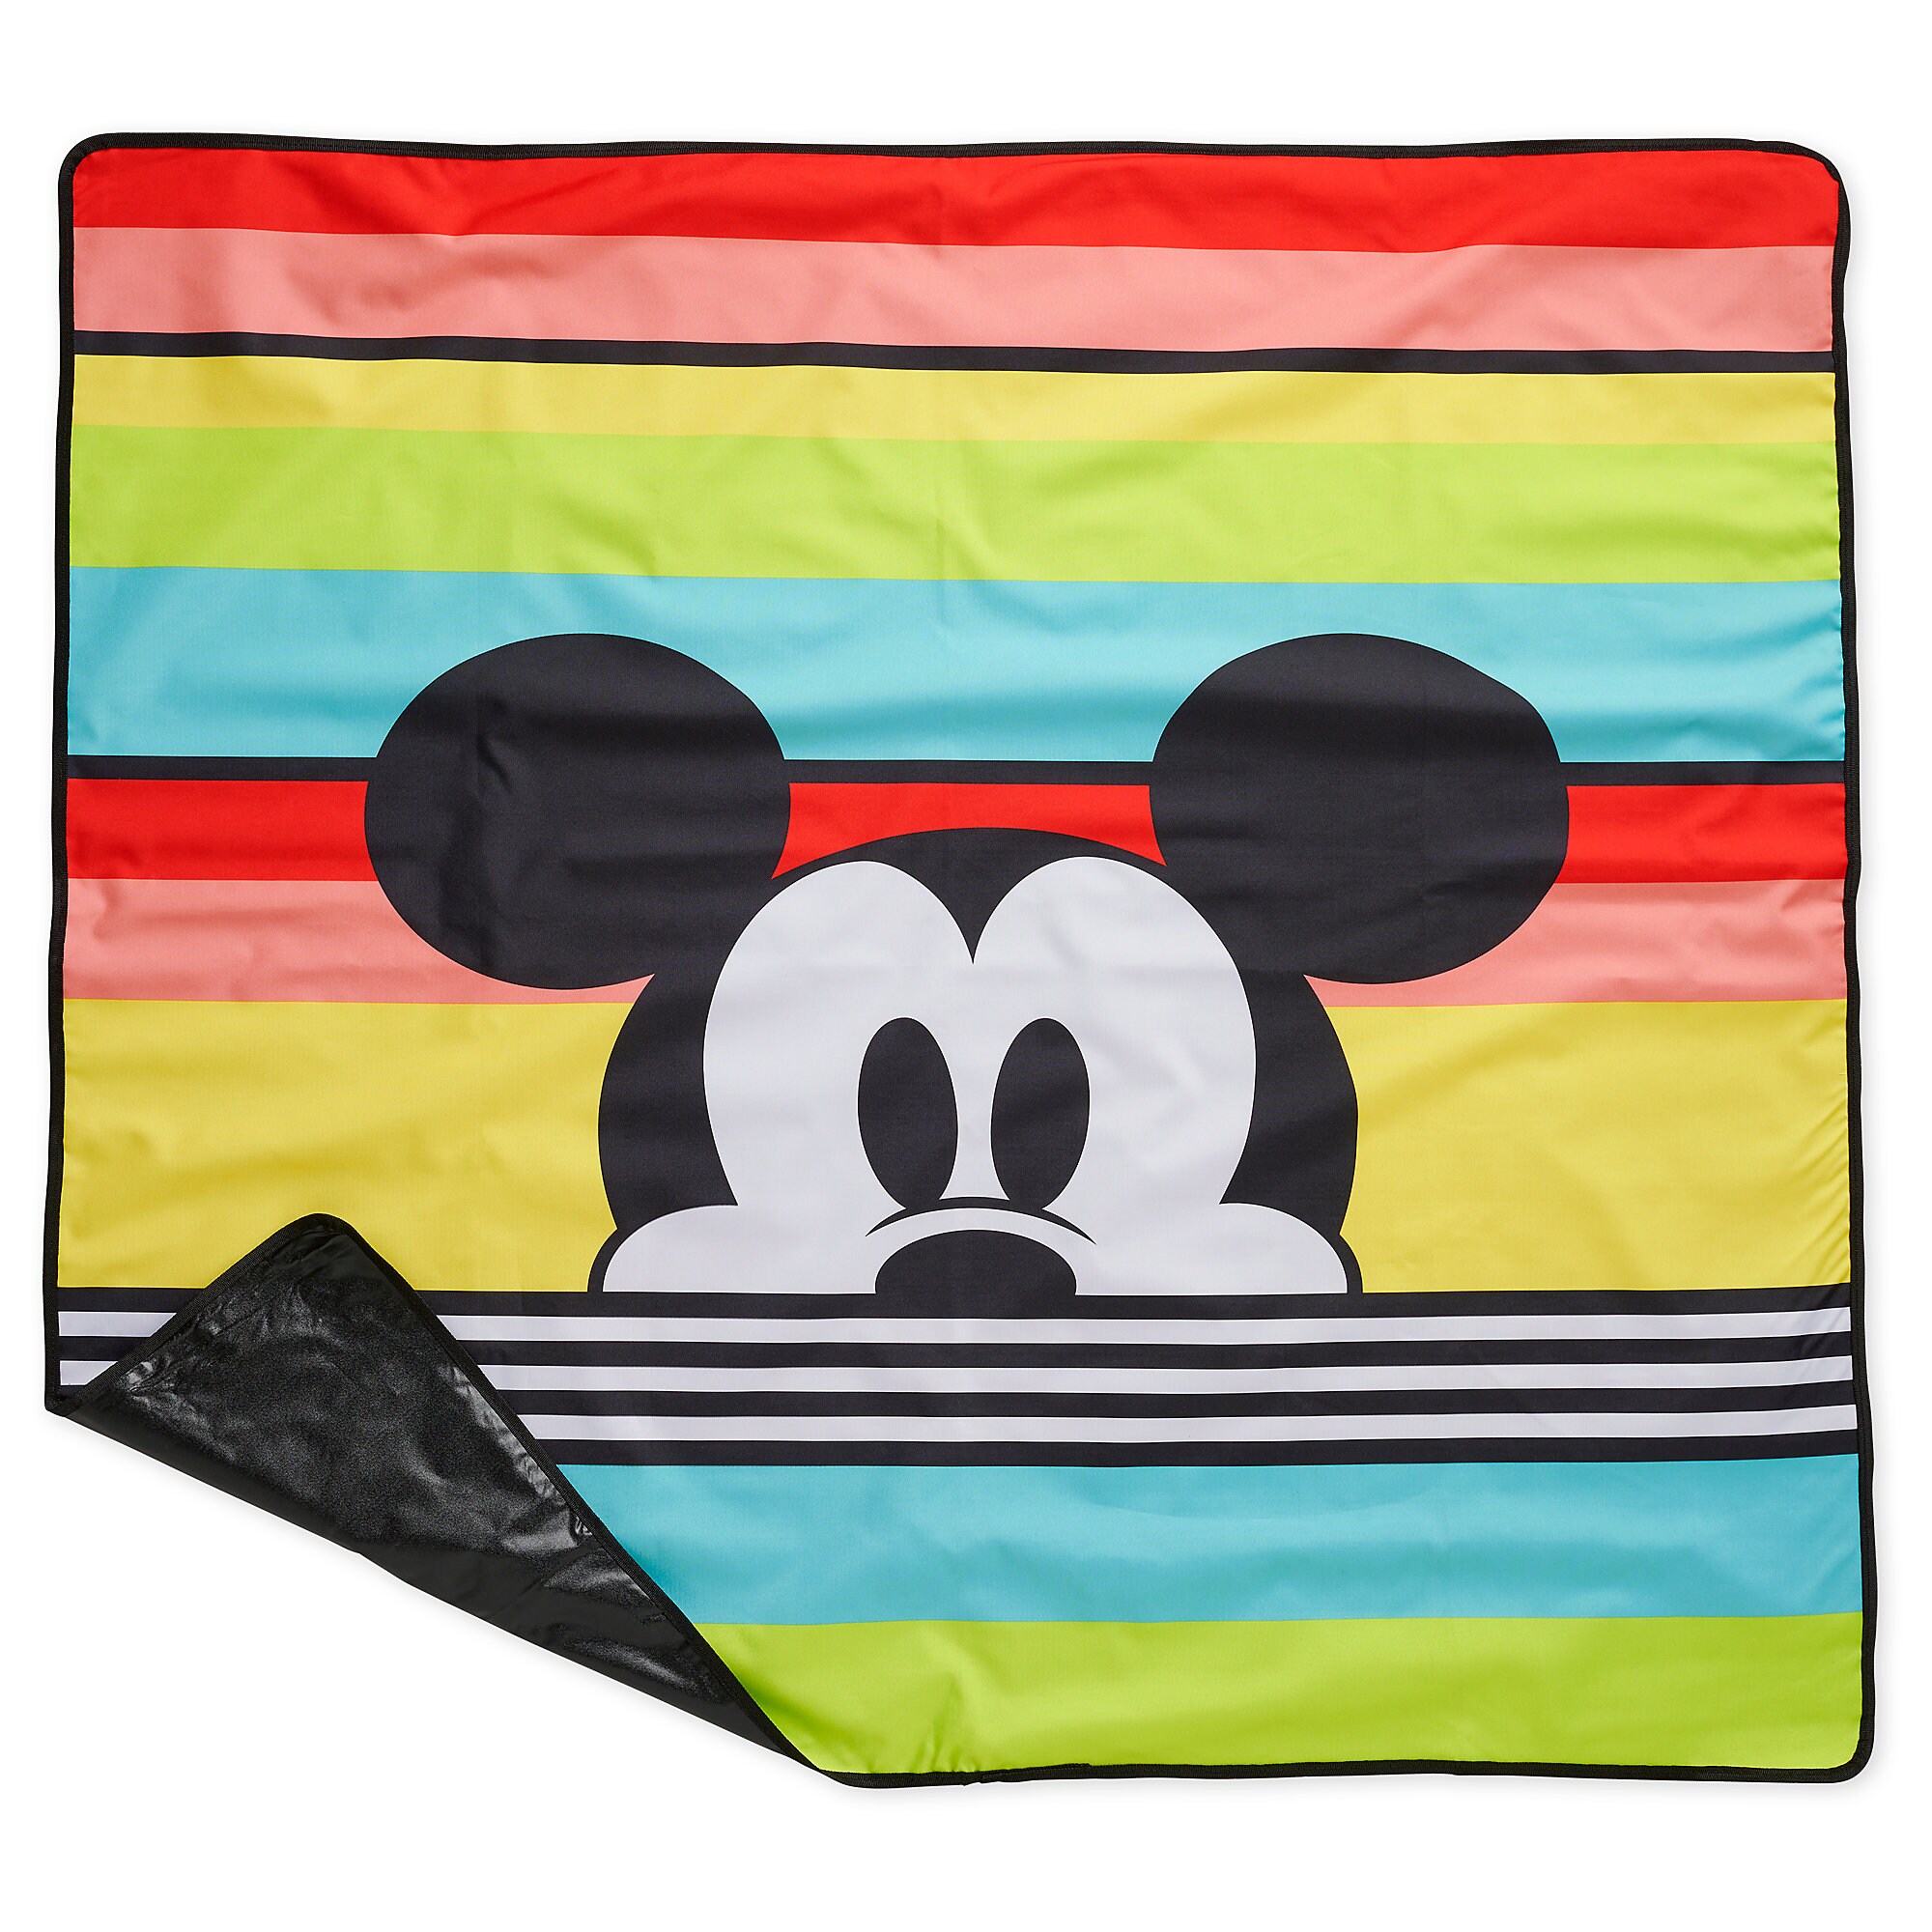 Mickey Mouse Summer Fun Backpack with Picnic Mat